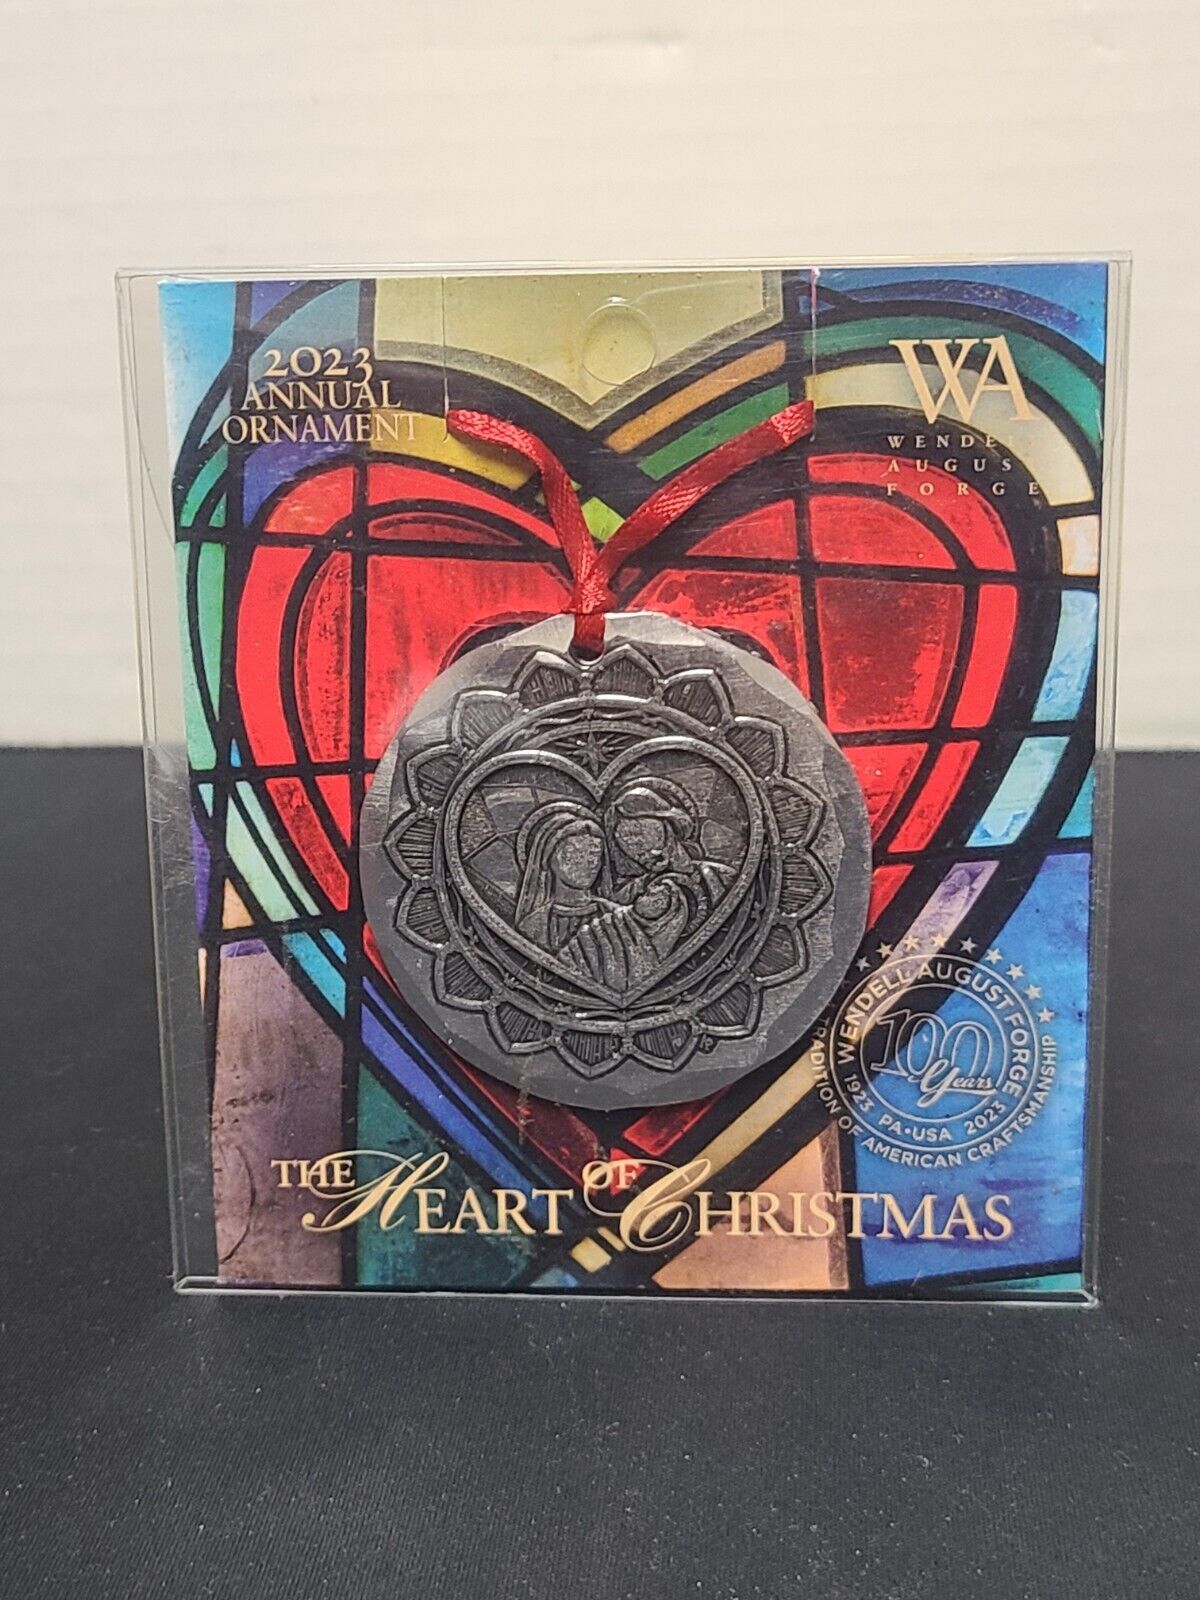 The 2023 Annual Ornament: Heart of Christmas New